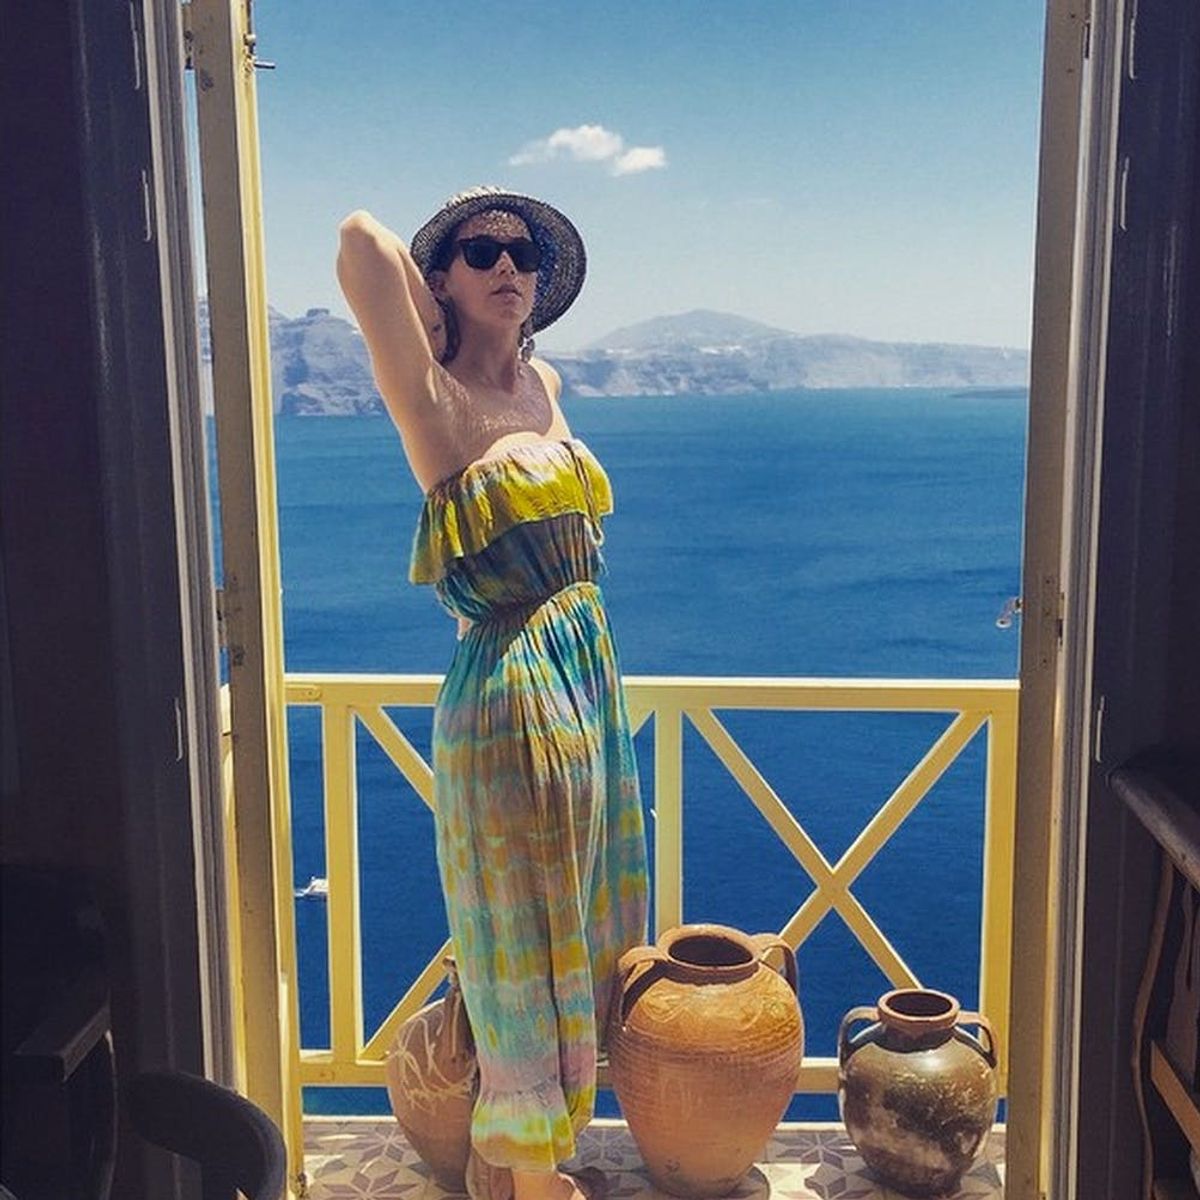 Katy Perry’s Vacation Pictures Will Give You Major Wanderlust